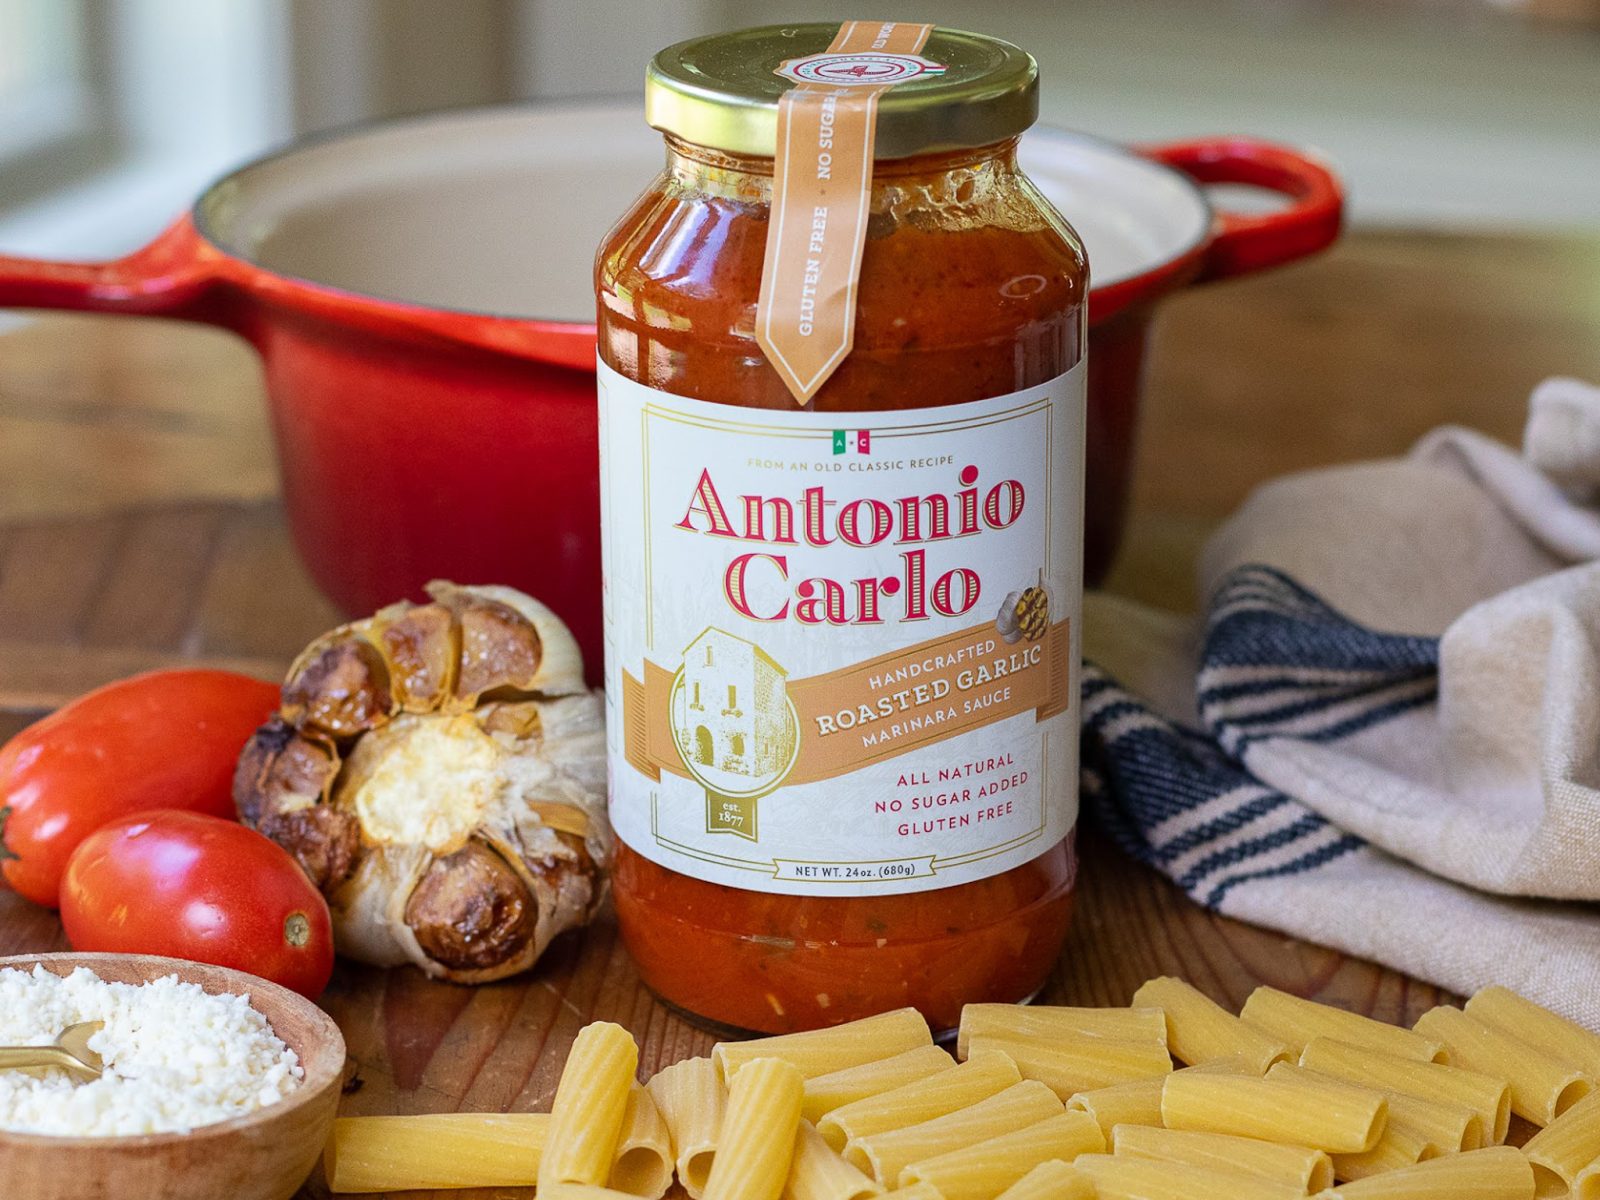 Antonio Carlo Gourmet Pasta Sauce Is Perfect For Any Recipe – Pick Up The Jars At Publix For Your Next Meal